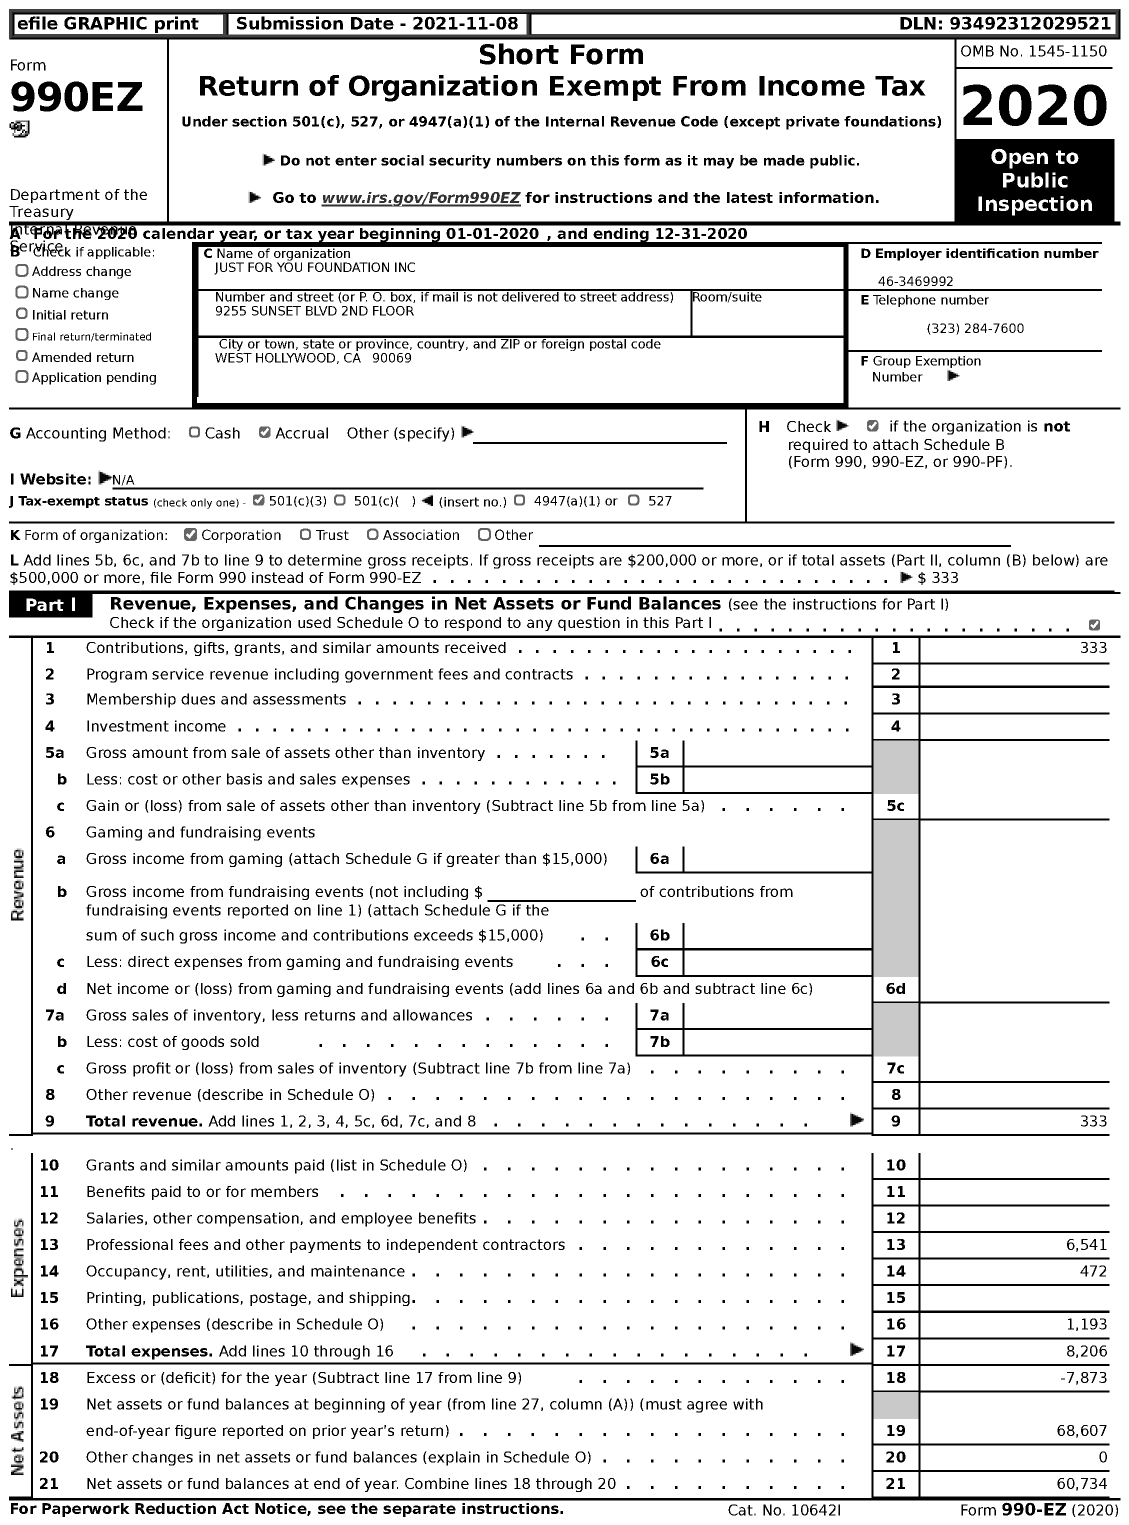 Image of first page of 2020 Form 990EZ for Just for You Foundation